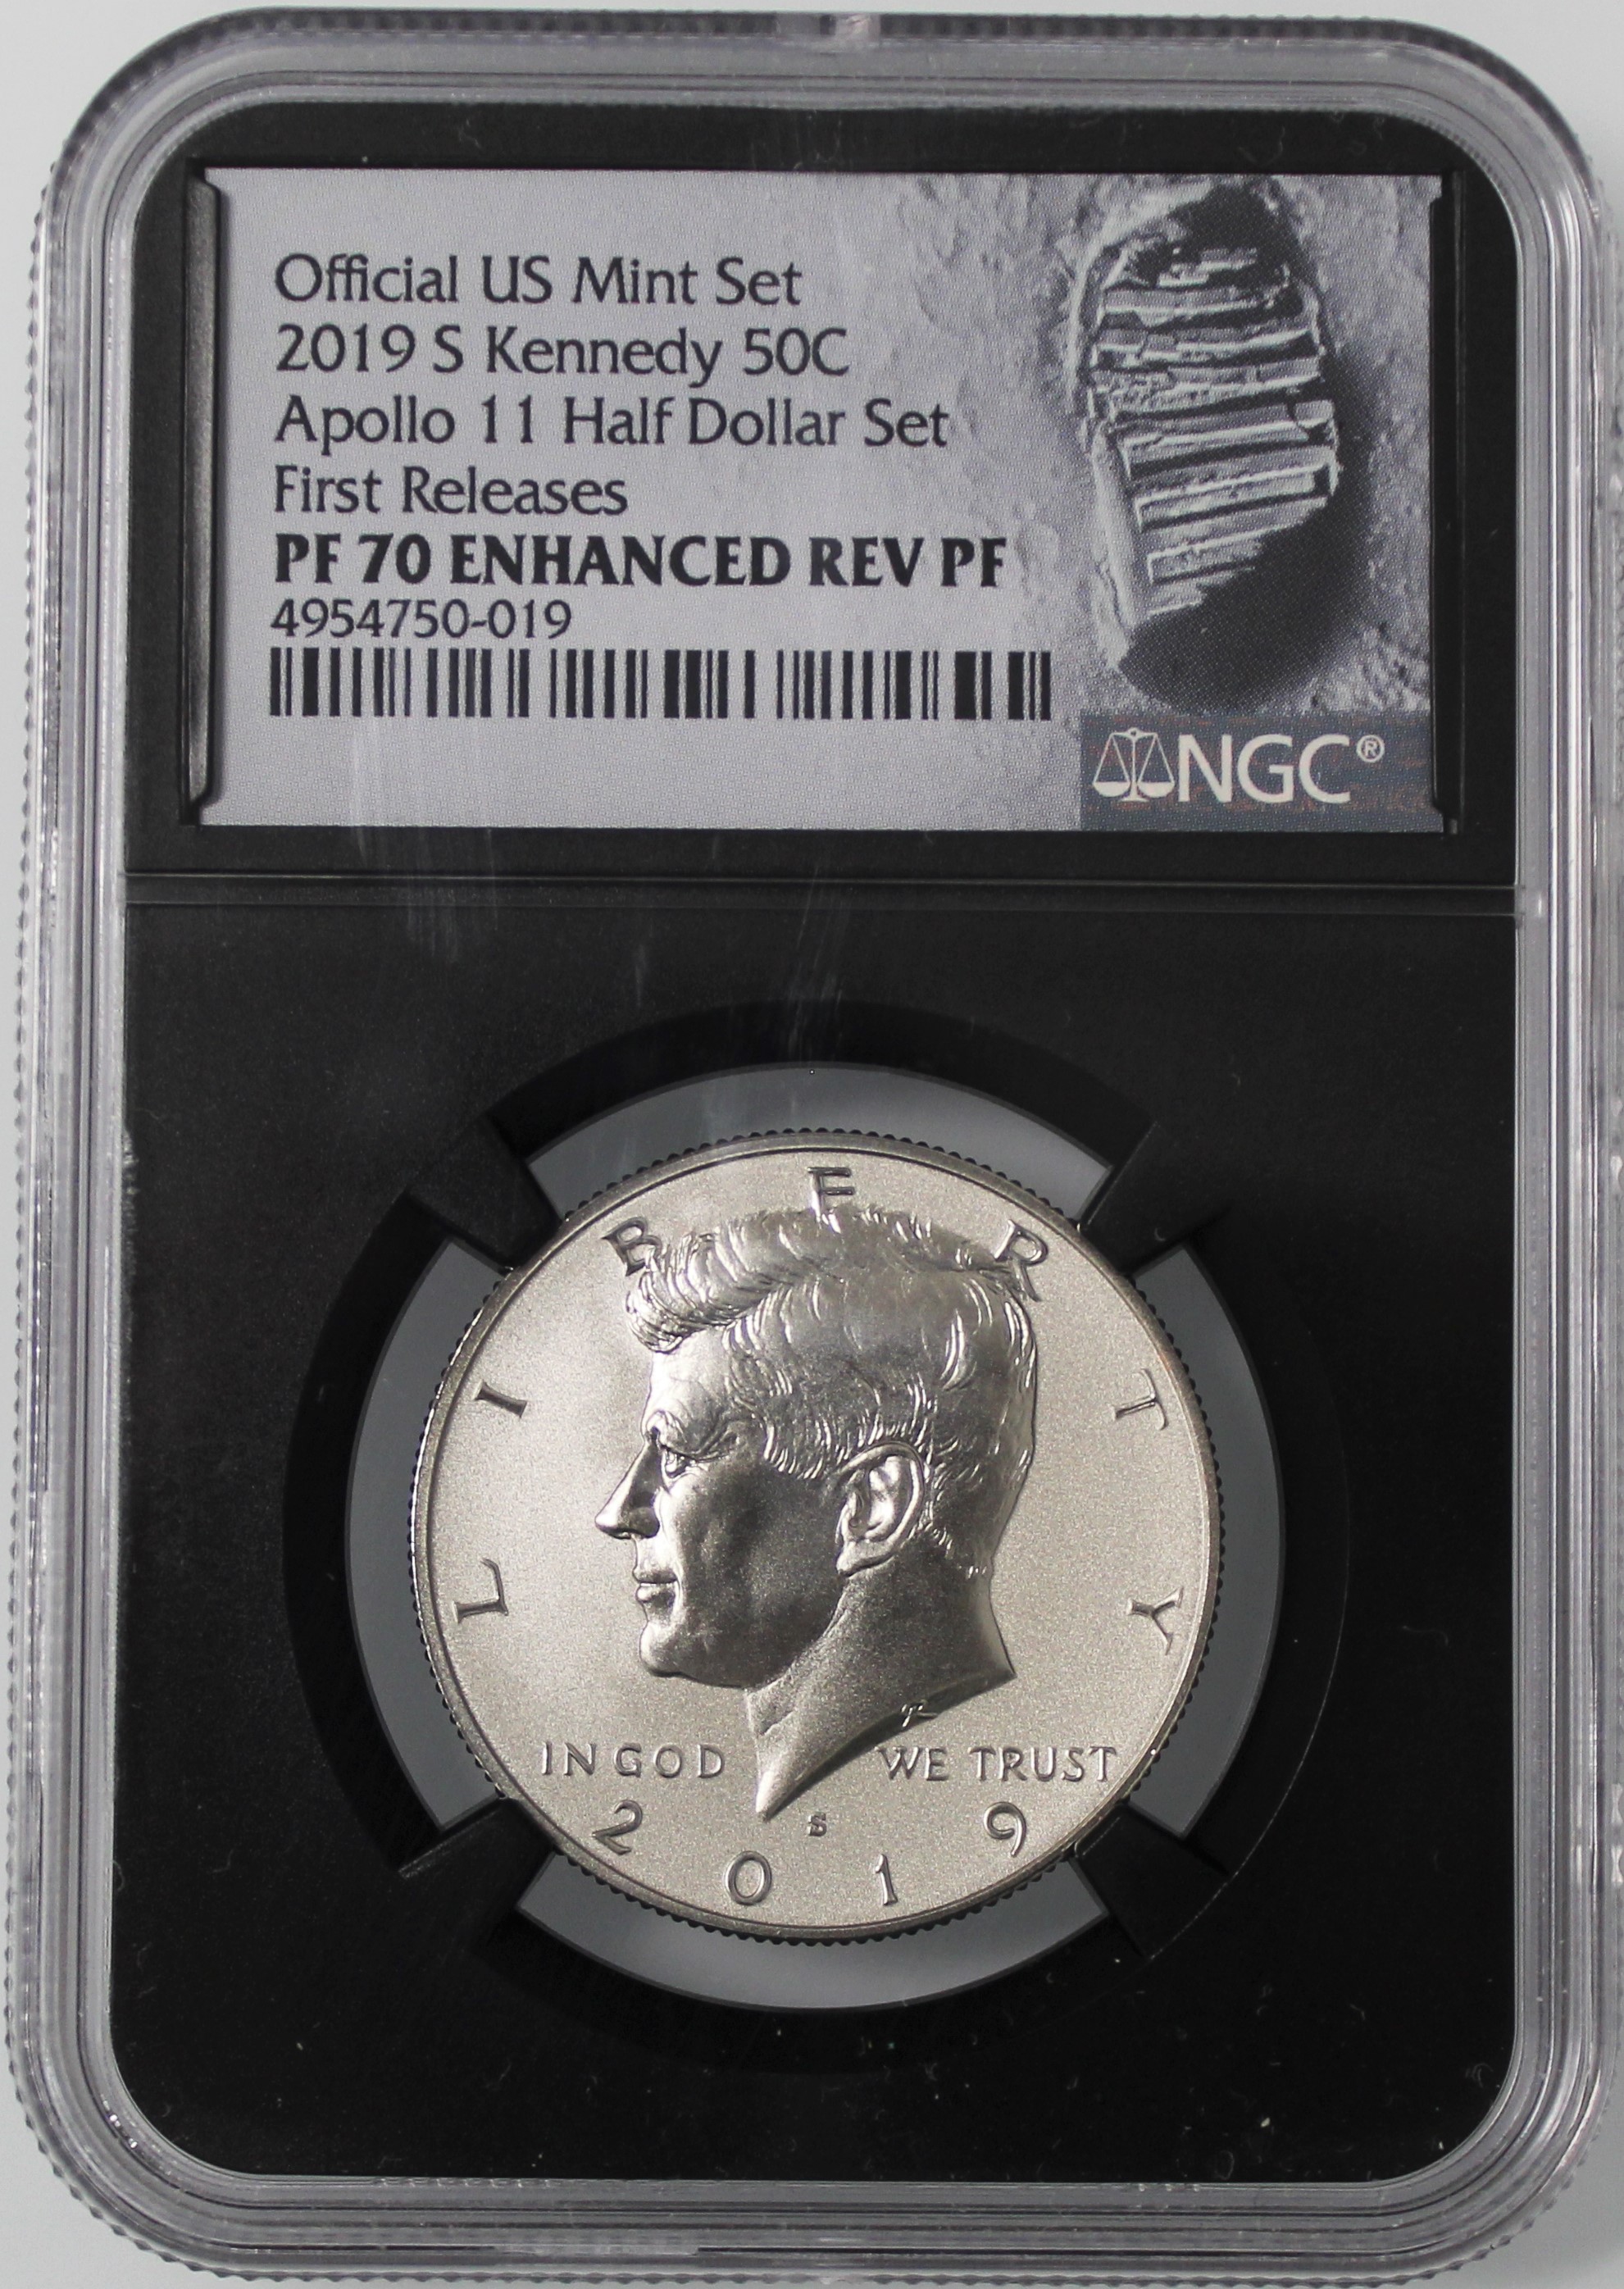 2019 S 50C Enhanced Reverse Proof Kennedy Half Dollar Apollo 11 Official US Mint Set NGC PF70 ENHANCED REV PF First Releases Boot Print Label Black Core